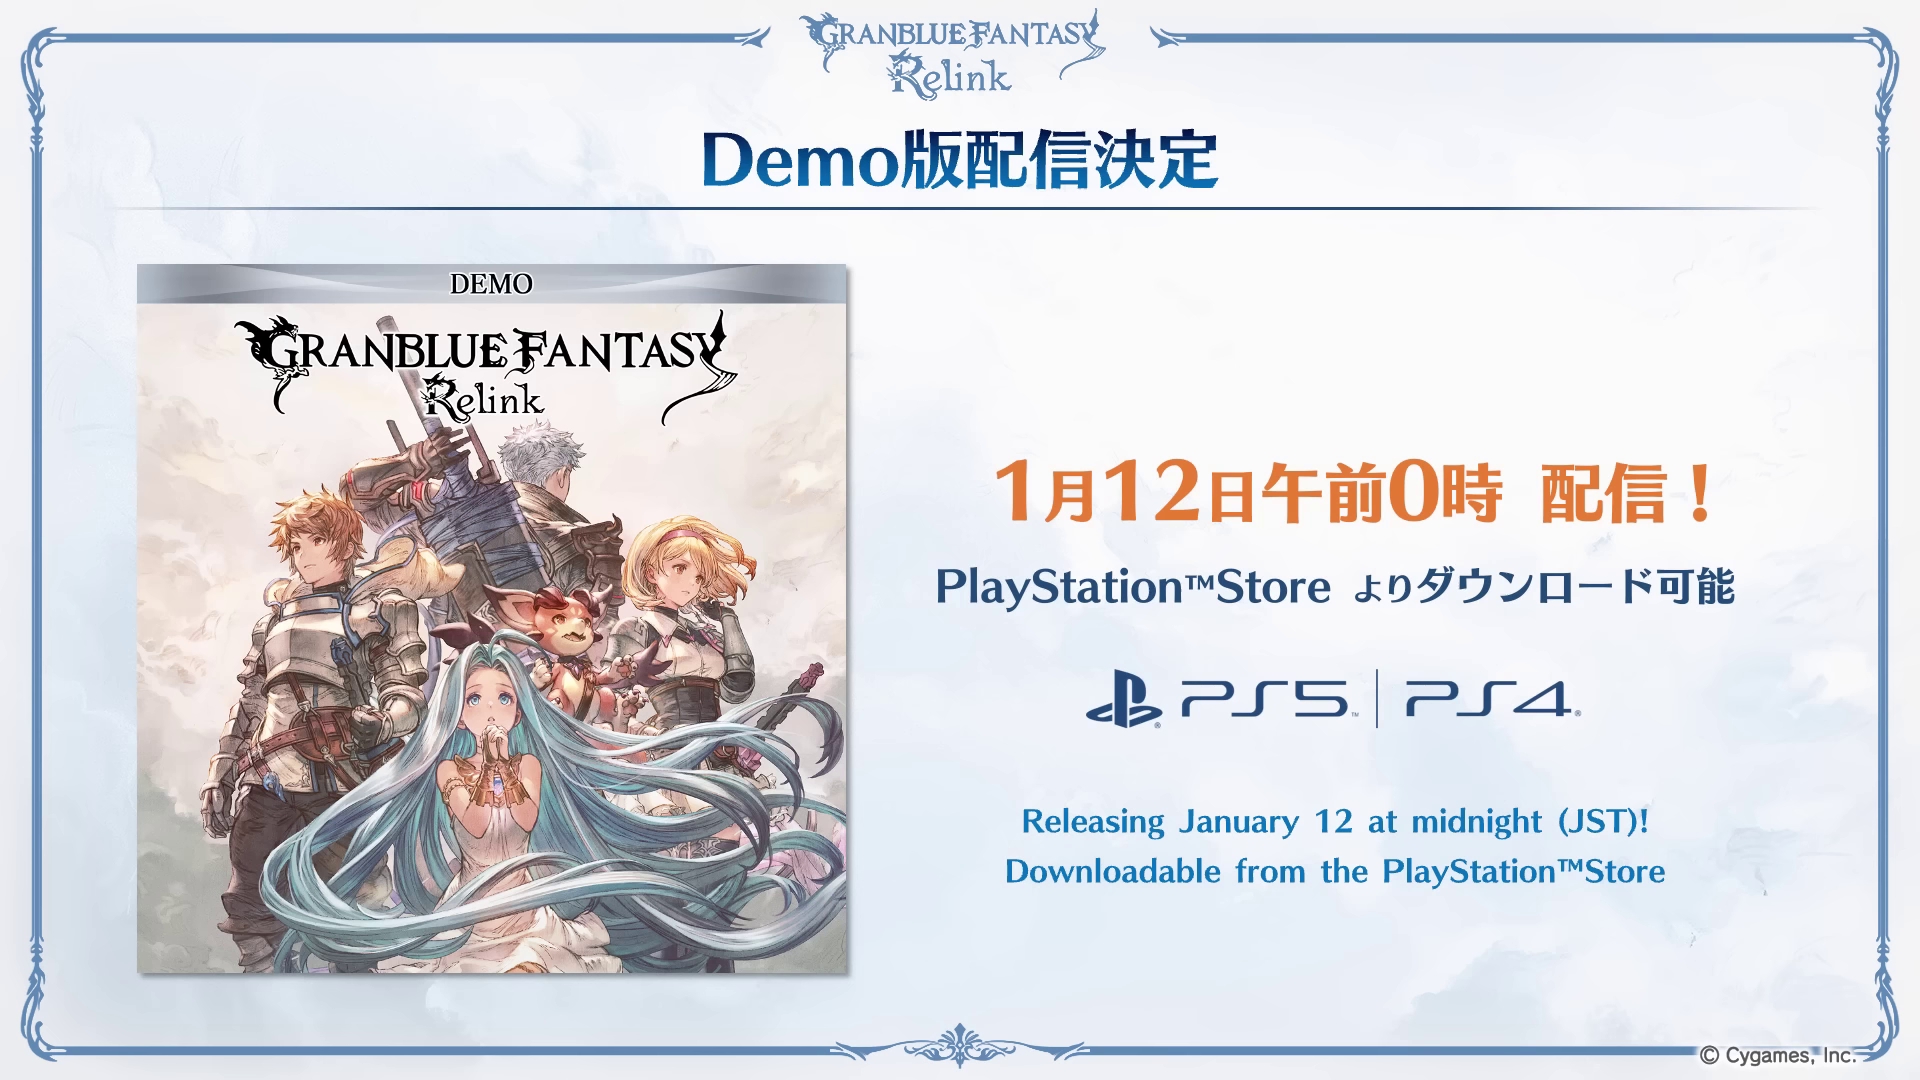 Granblue Fantasy: Relink re-emerges with 2022 release window on PS4 and PS5